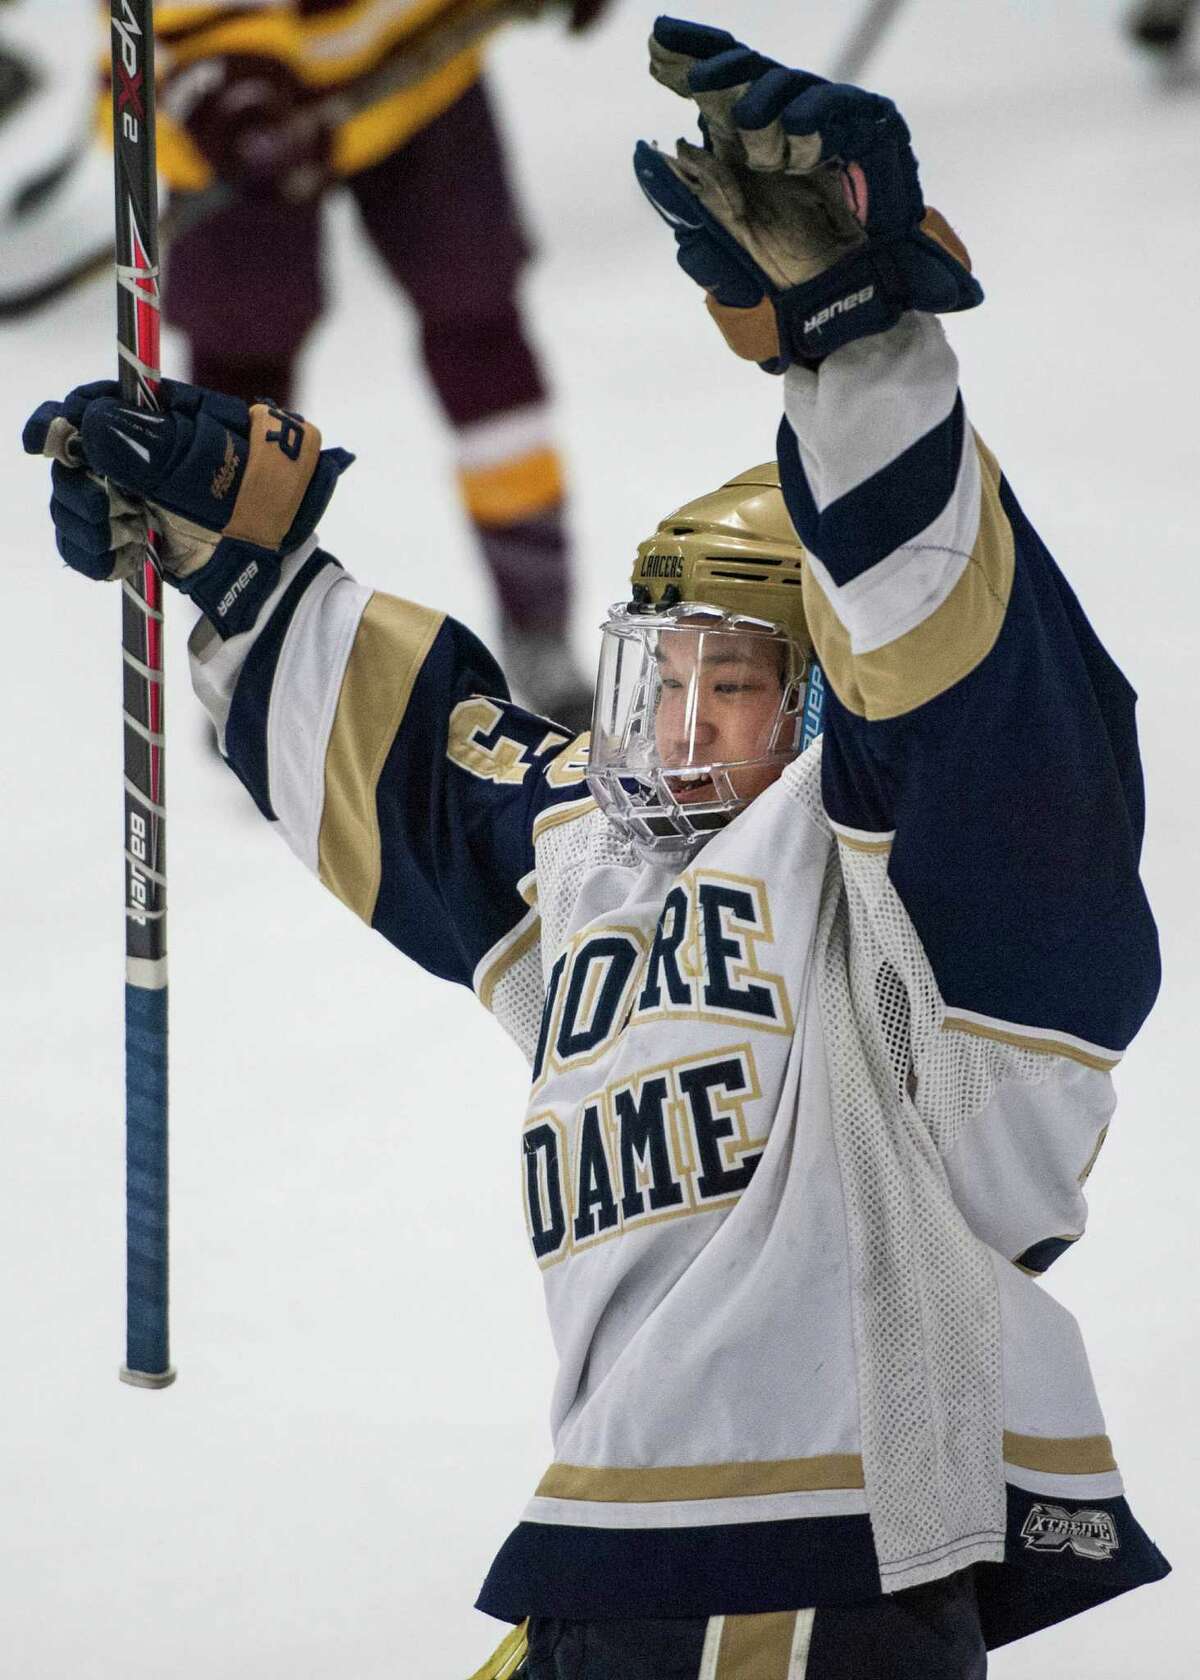 Notre Dame Fairfield high school's Jonny Suporn celebrates his team scoring a goal in the first period of a first round game of the CIAC division I boys ice hockey tournament against St. Joseph high school played at Milford Ice Pavilion, Milford, CT on Wednesday, March, 12th, 2014.